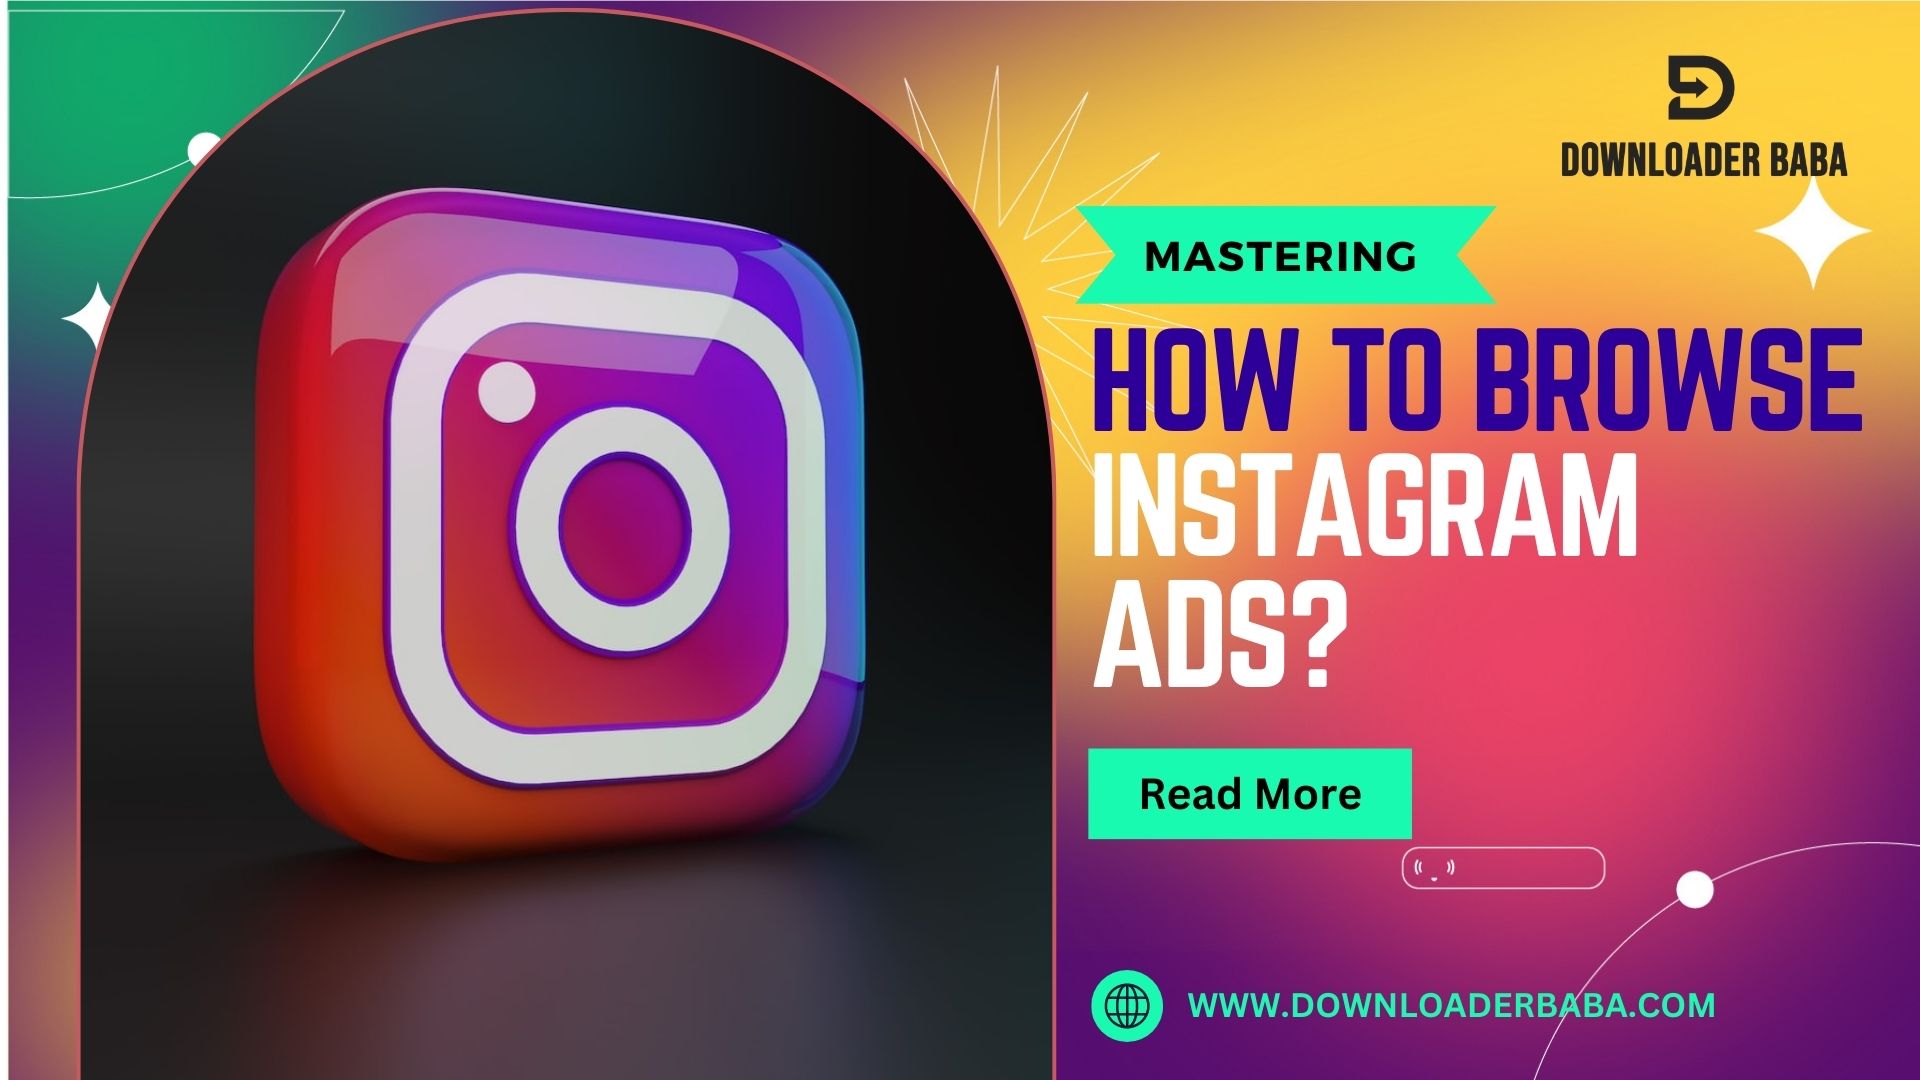 an image of How to browse Instagram ads? - Mastering Engagement with Instagram Ads!